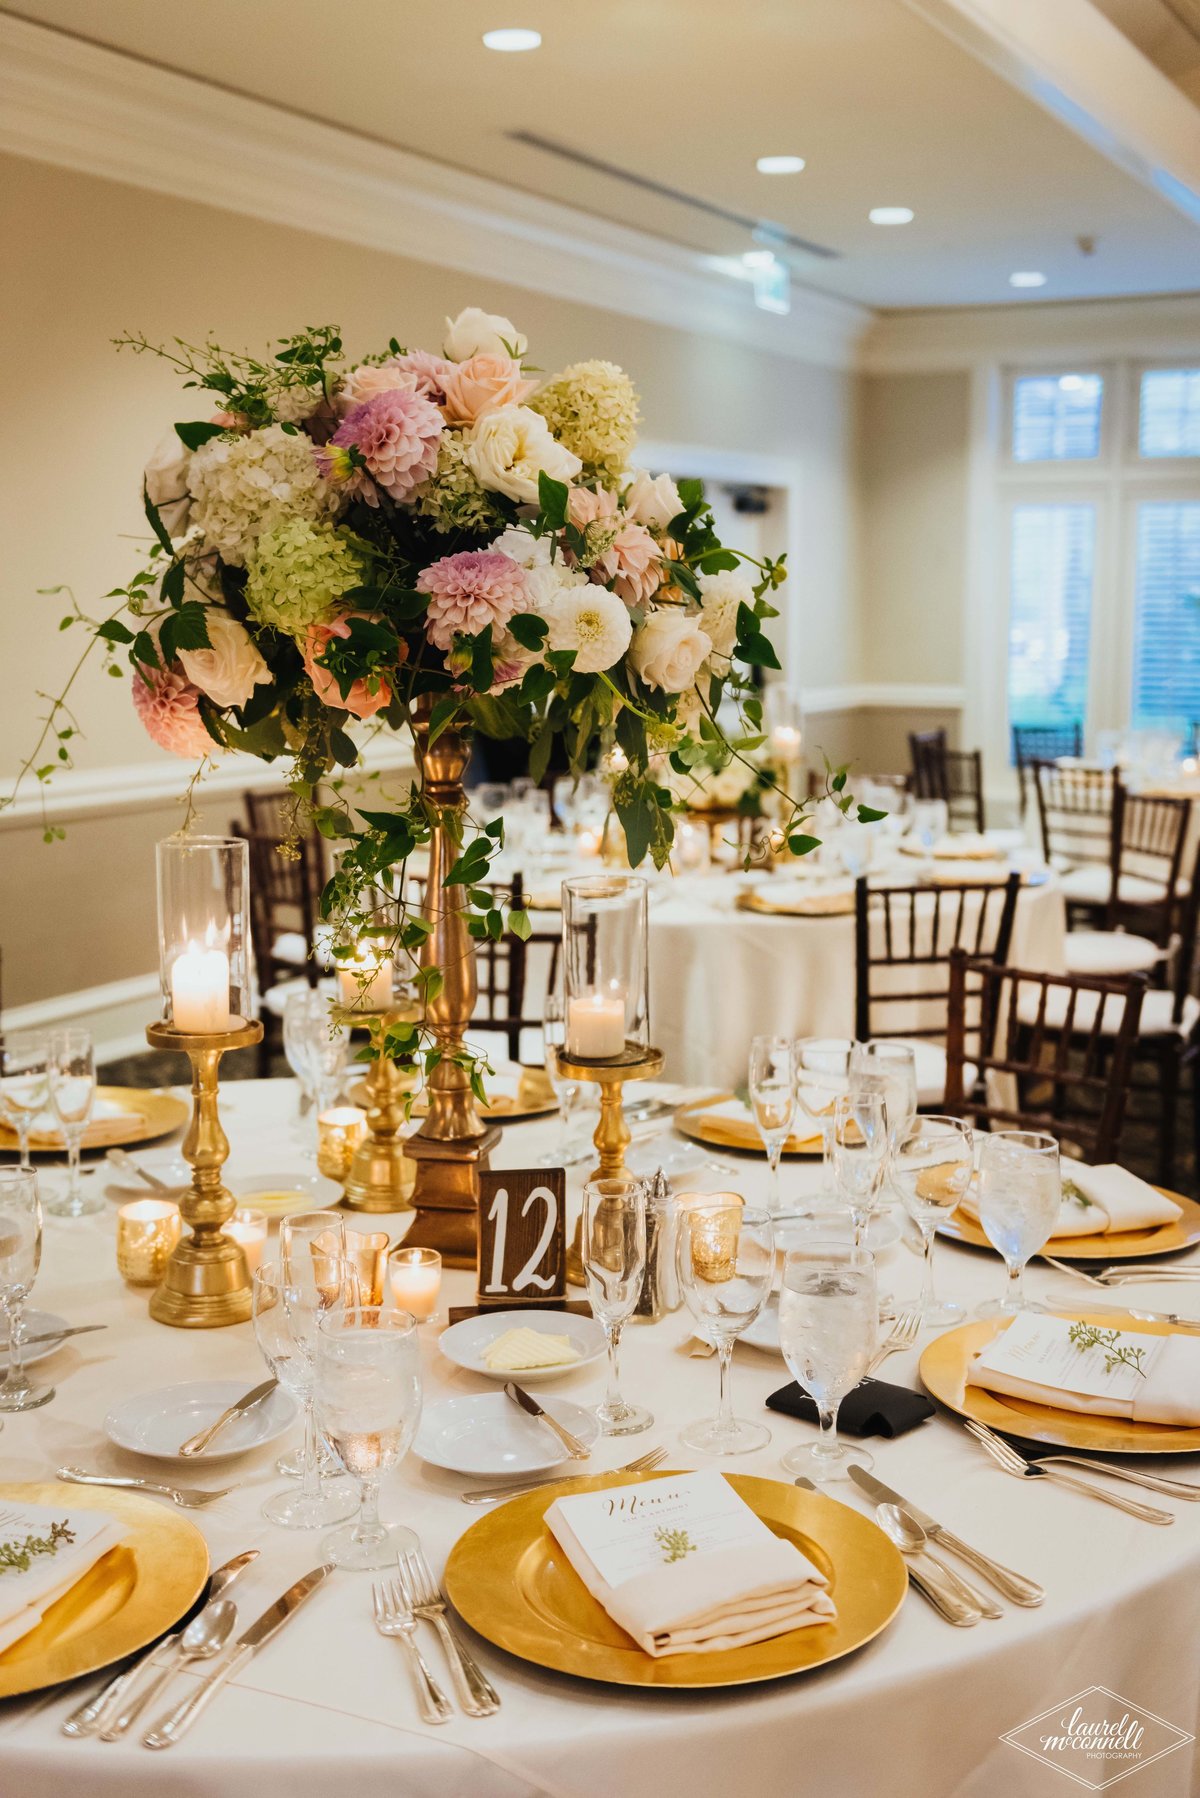 elevated centerpiece of peach dahlias, peach and ivory roses, trailing greenery on gold stand on table with ivory linen and gold charger plates